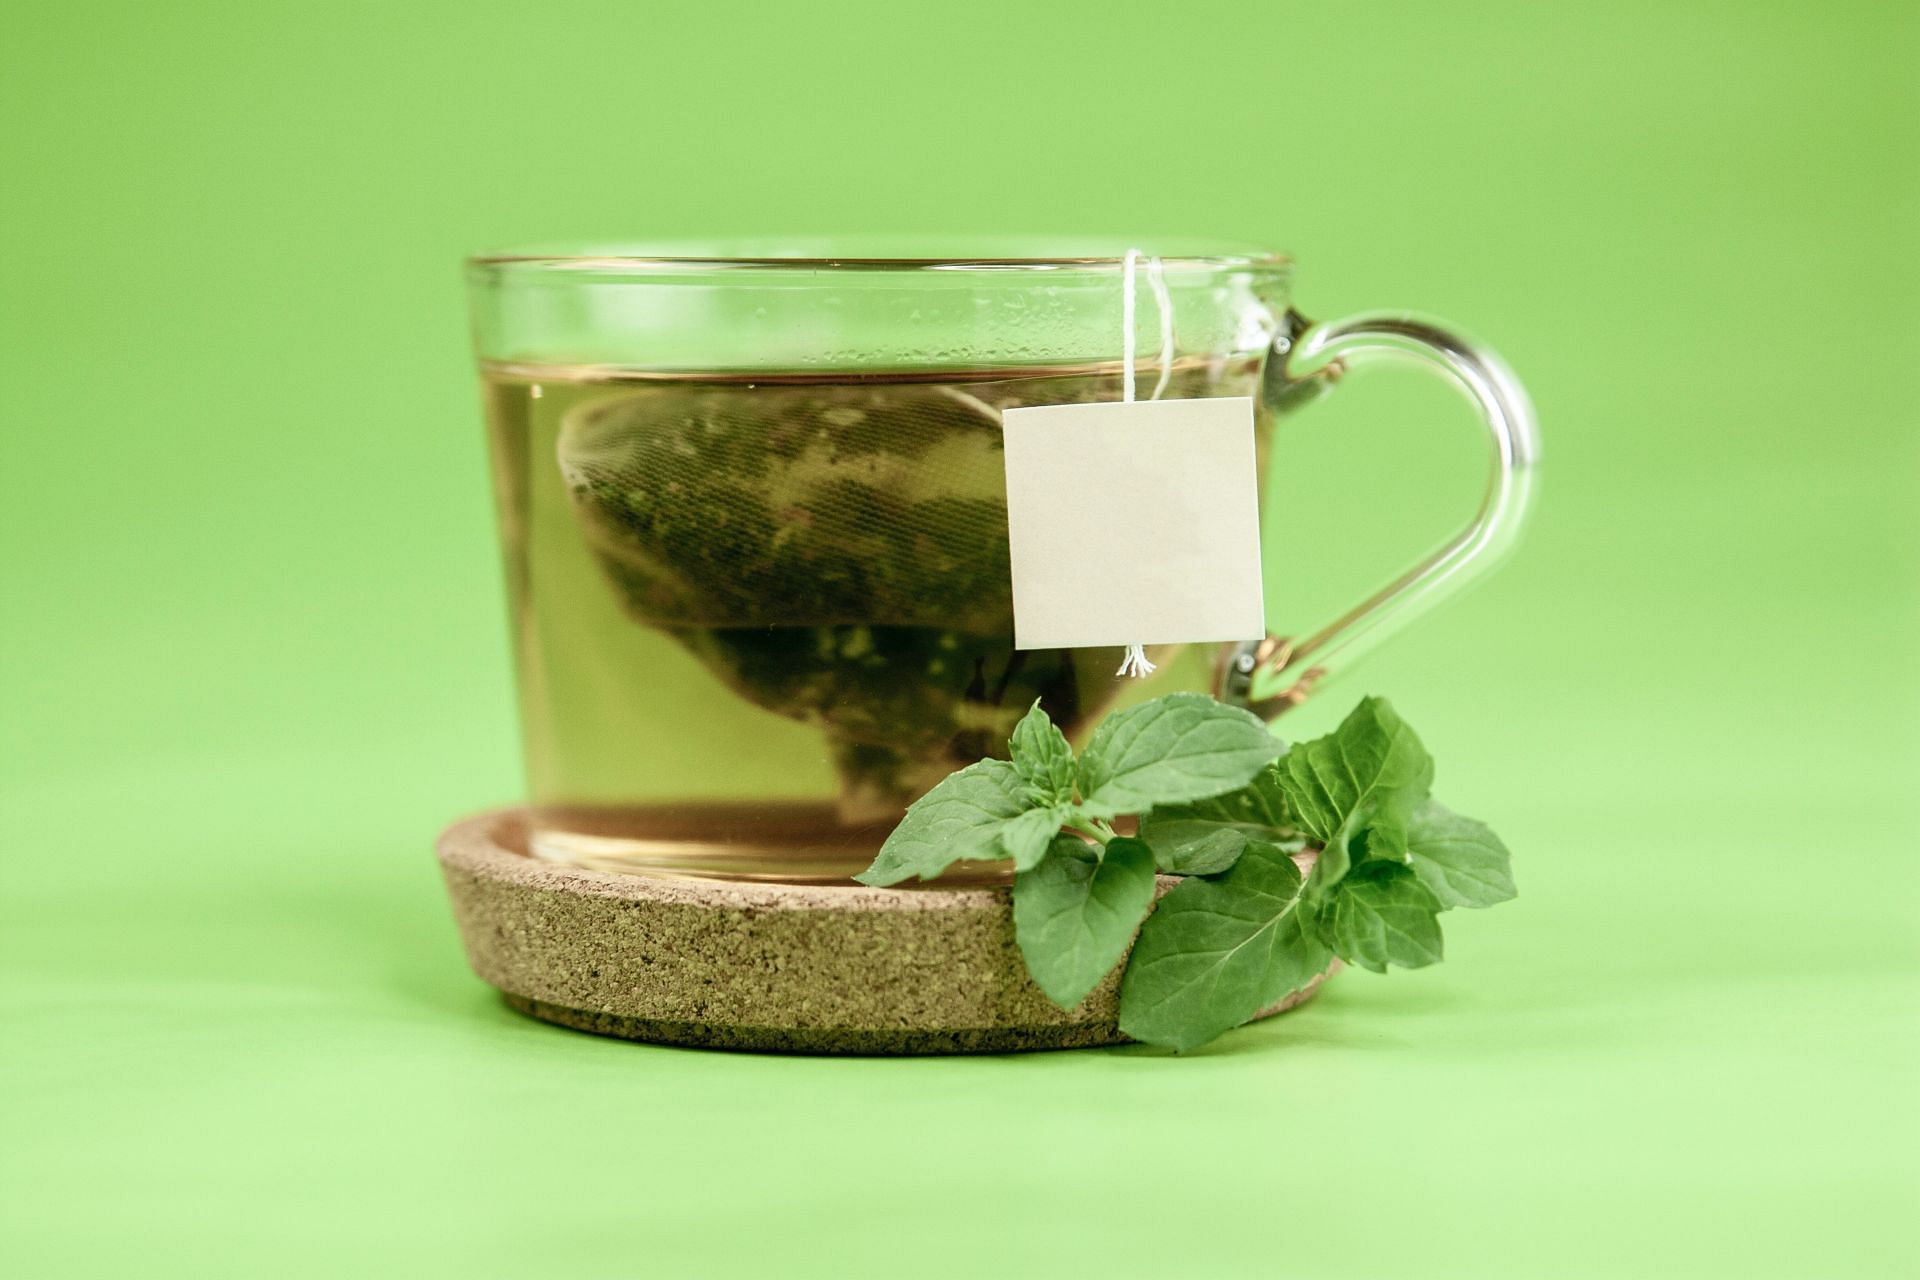 Green Tea can aid in weight loss and lower your risk of developing a number of illnesses, including as diabetes, heart disease, and cancer. (Image via Unsplash/ Laark Boshoff)